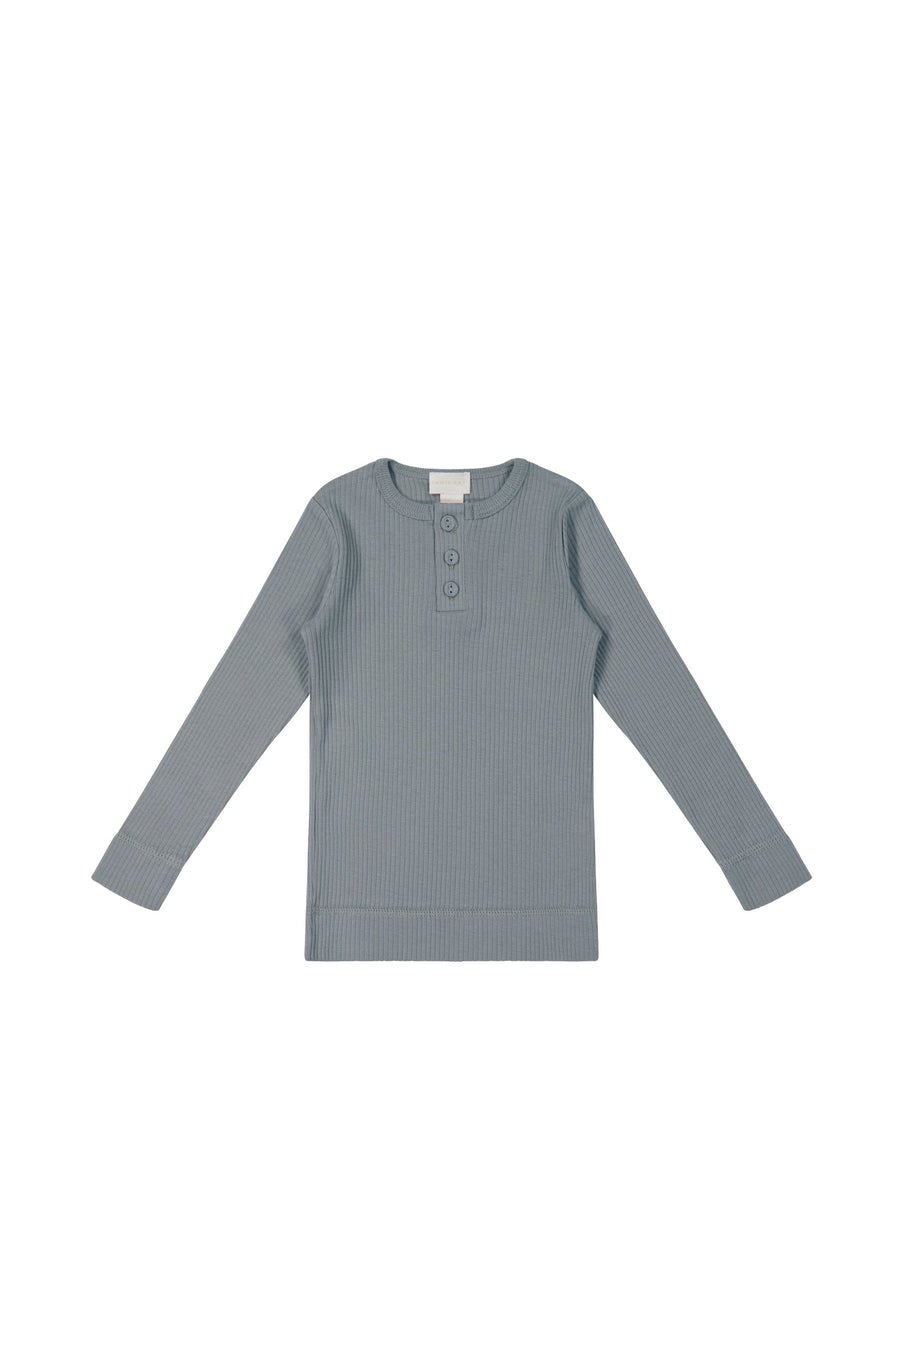 Organic Cotton Modal Long Sleeve Henley - Pebble Childrens Top from Jamie Kay USA